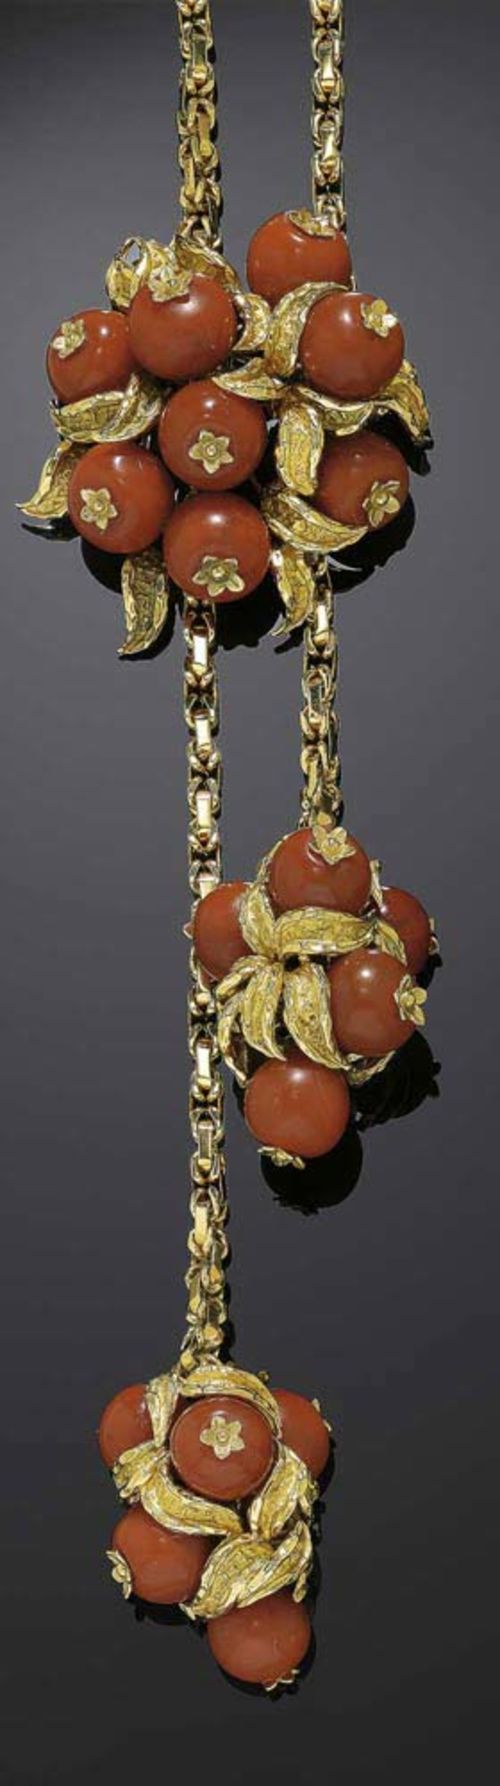 GOLD AND CARNELIAN SAUTOIR, E. MEISTER. Yellow gold 750. Highly decorative fantasy chain, both ends of which are made up of a cluster of 5 carnelian beads of ca. 12.5 mm Ø, between structured gold leaves. Large removable and adjustable latch in corresponding design, with 8 carnelian beads. L chain ca. 100 cm. Matches the following lot.